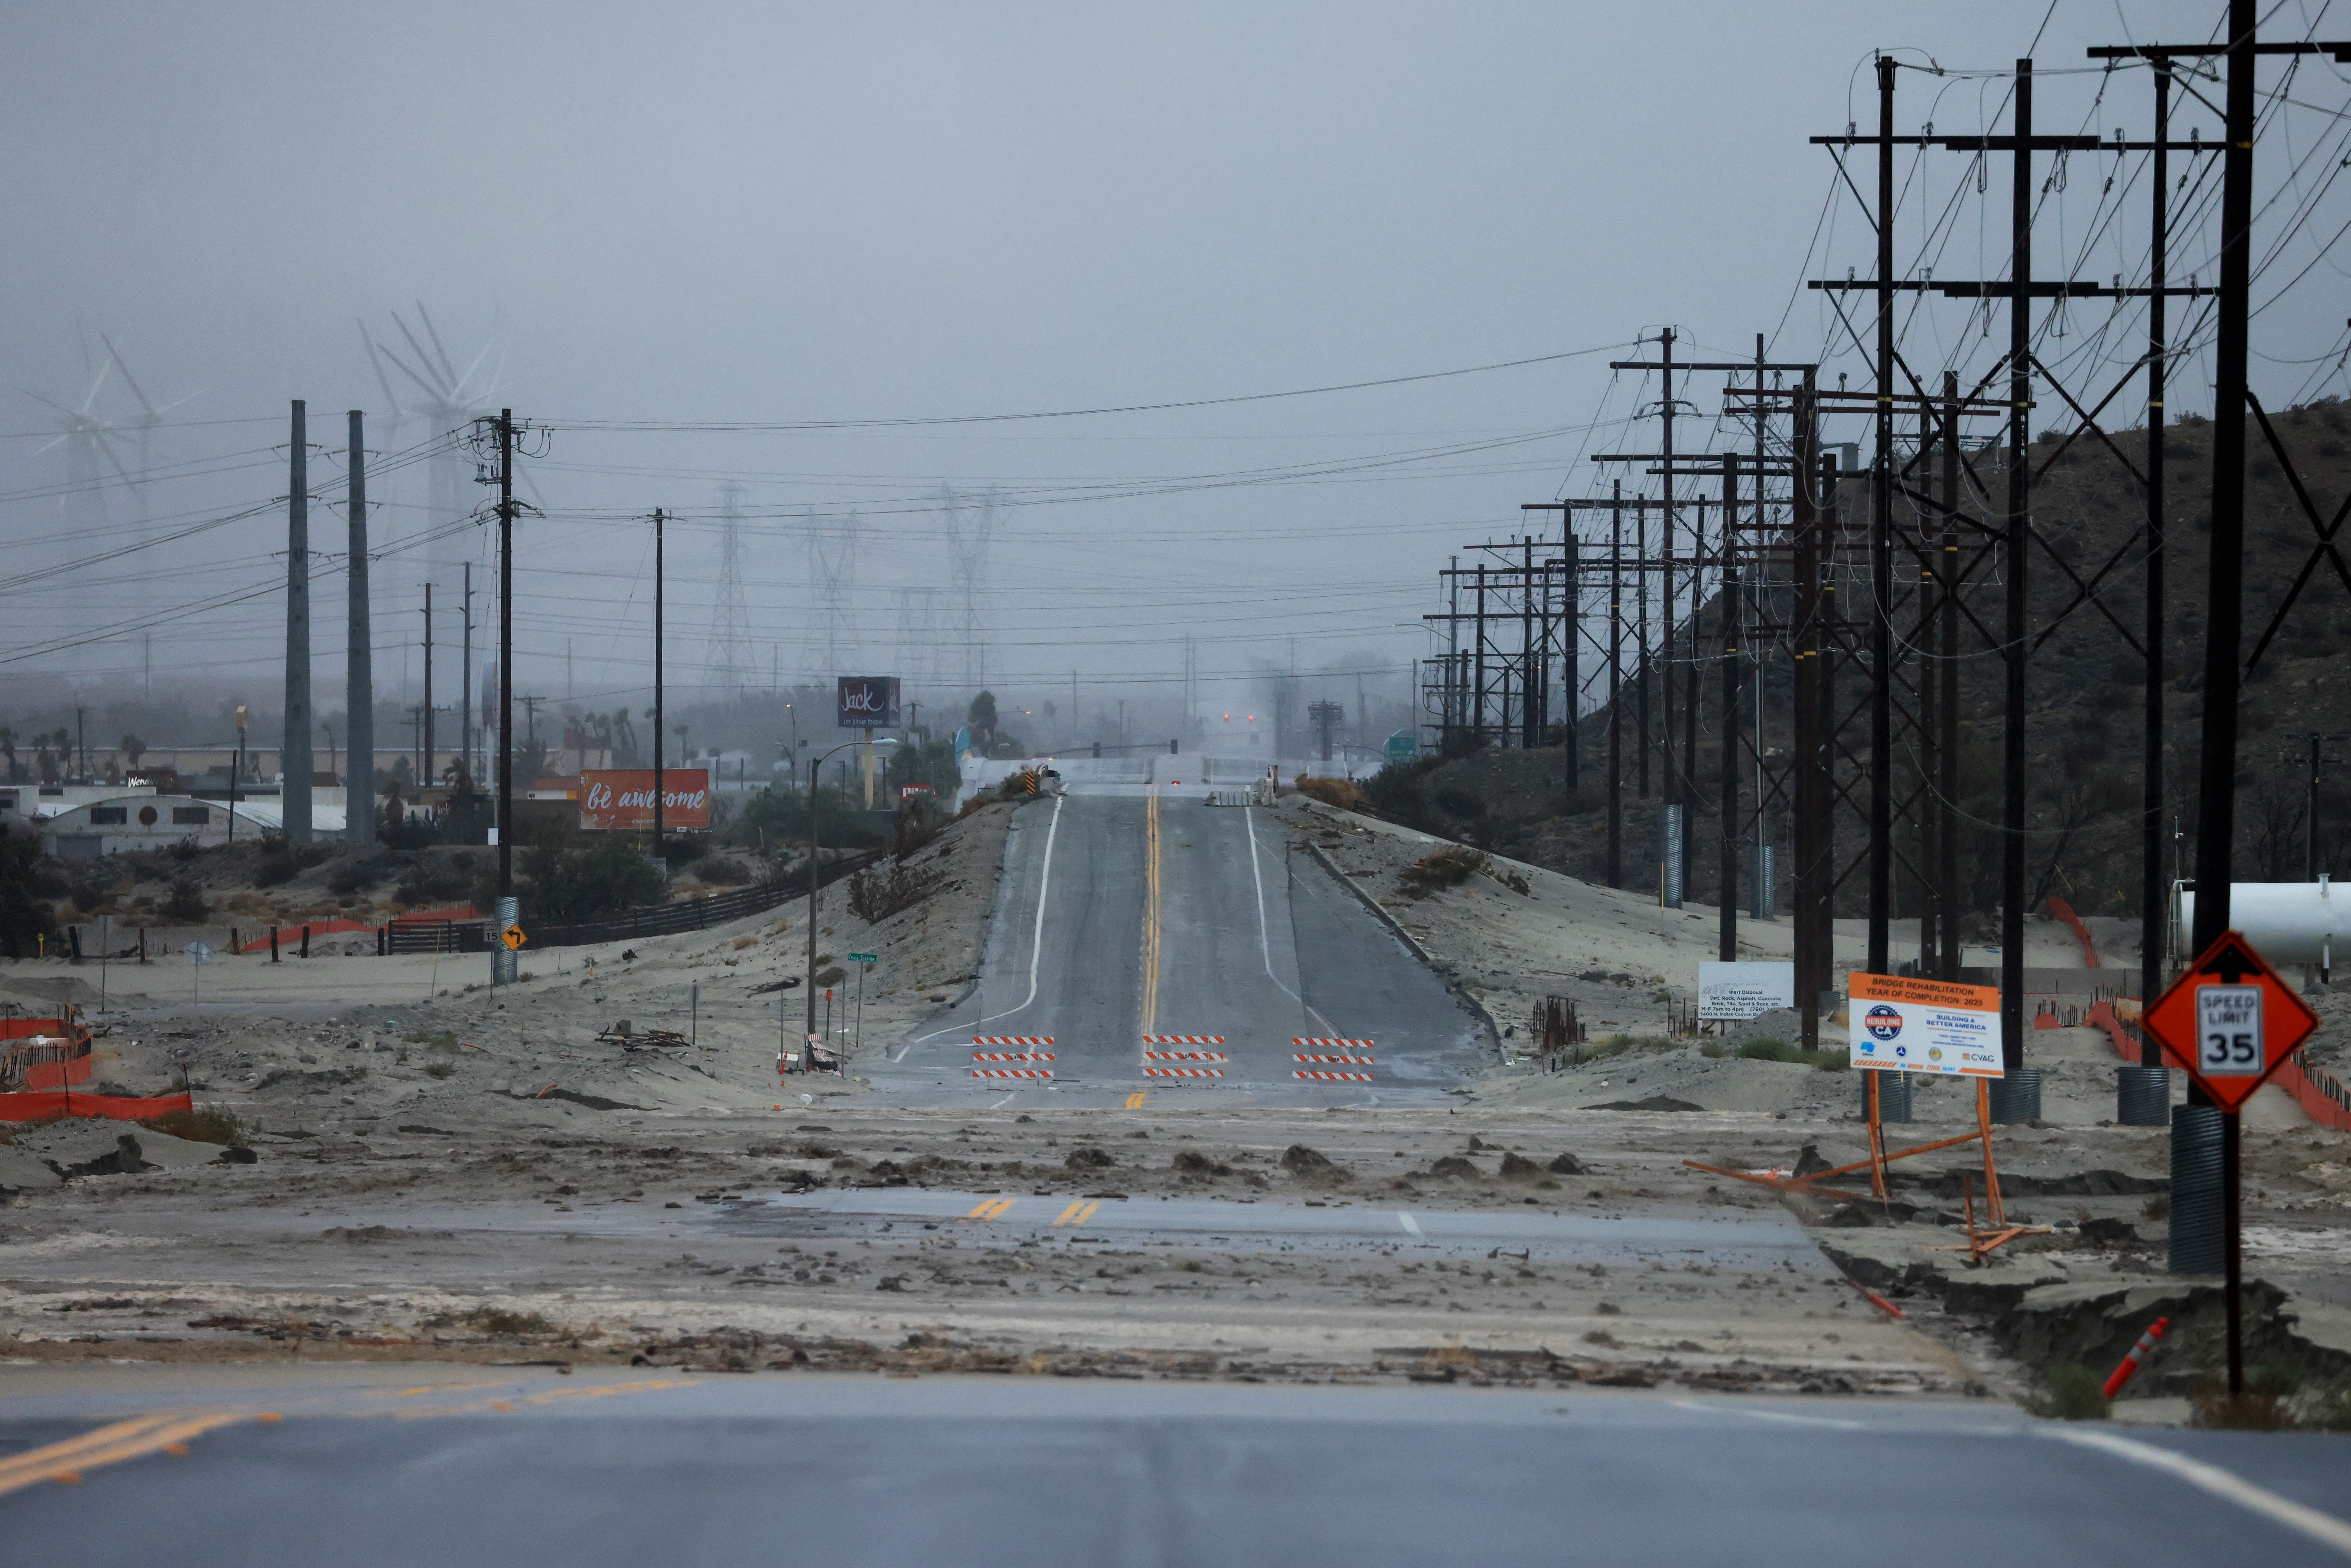  A road is washed out as Tropical Storm Hilary heads north into Palm Springs, California, on August 20, 2023. Heavy rains lashed California as Tropical Storm Hilary raced in from Mexico, bringing warnings of potentially life-threatening flooding in the typically arid southwestern United States